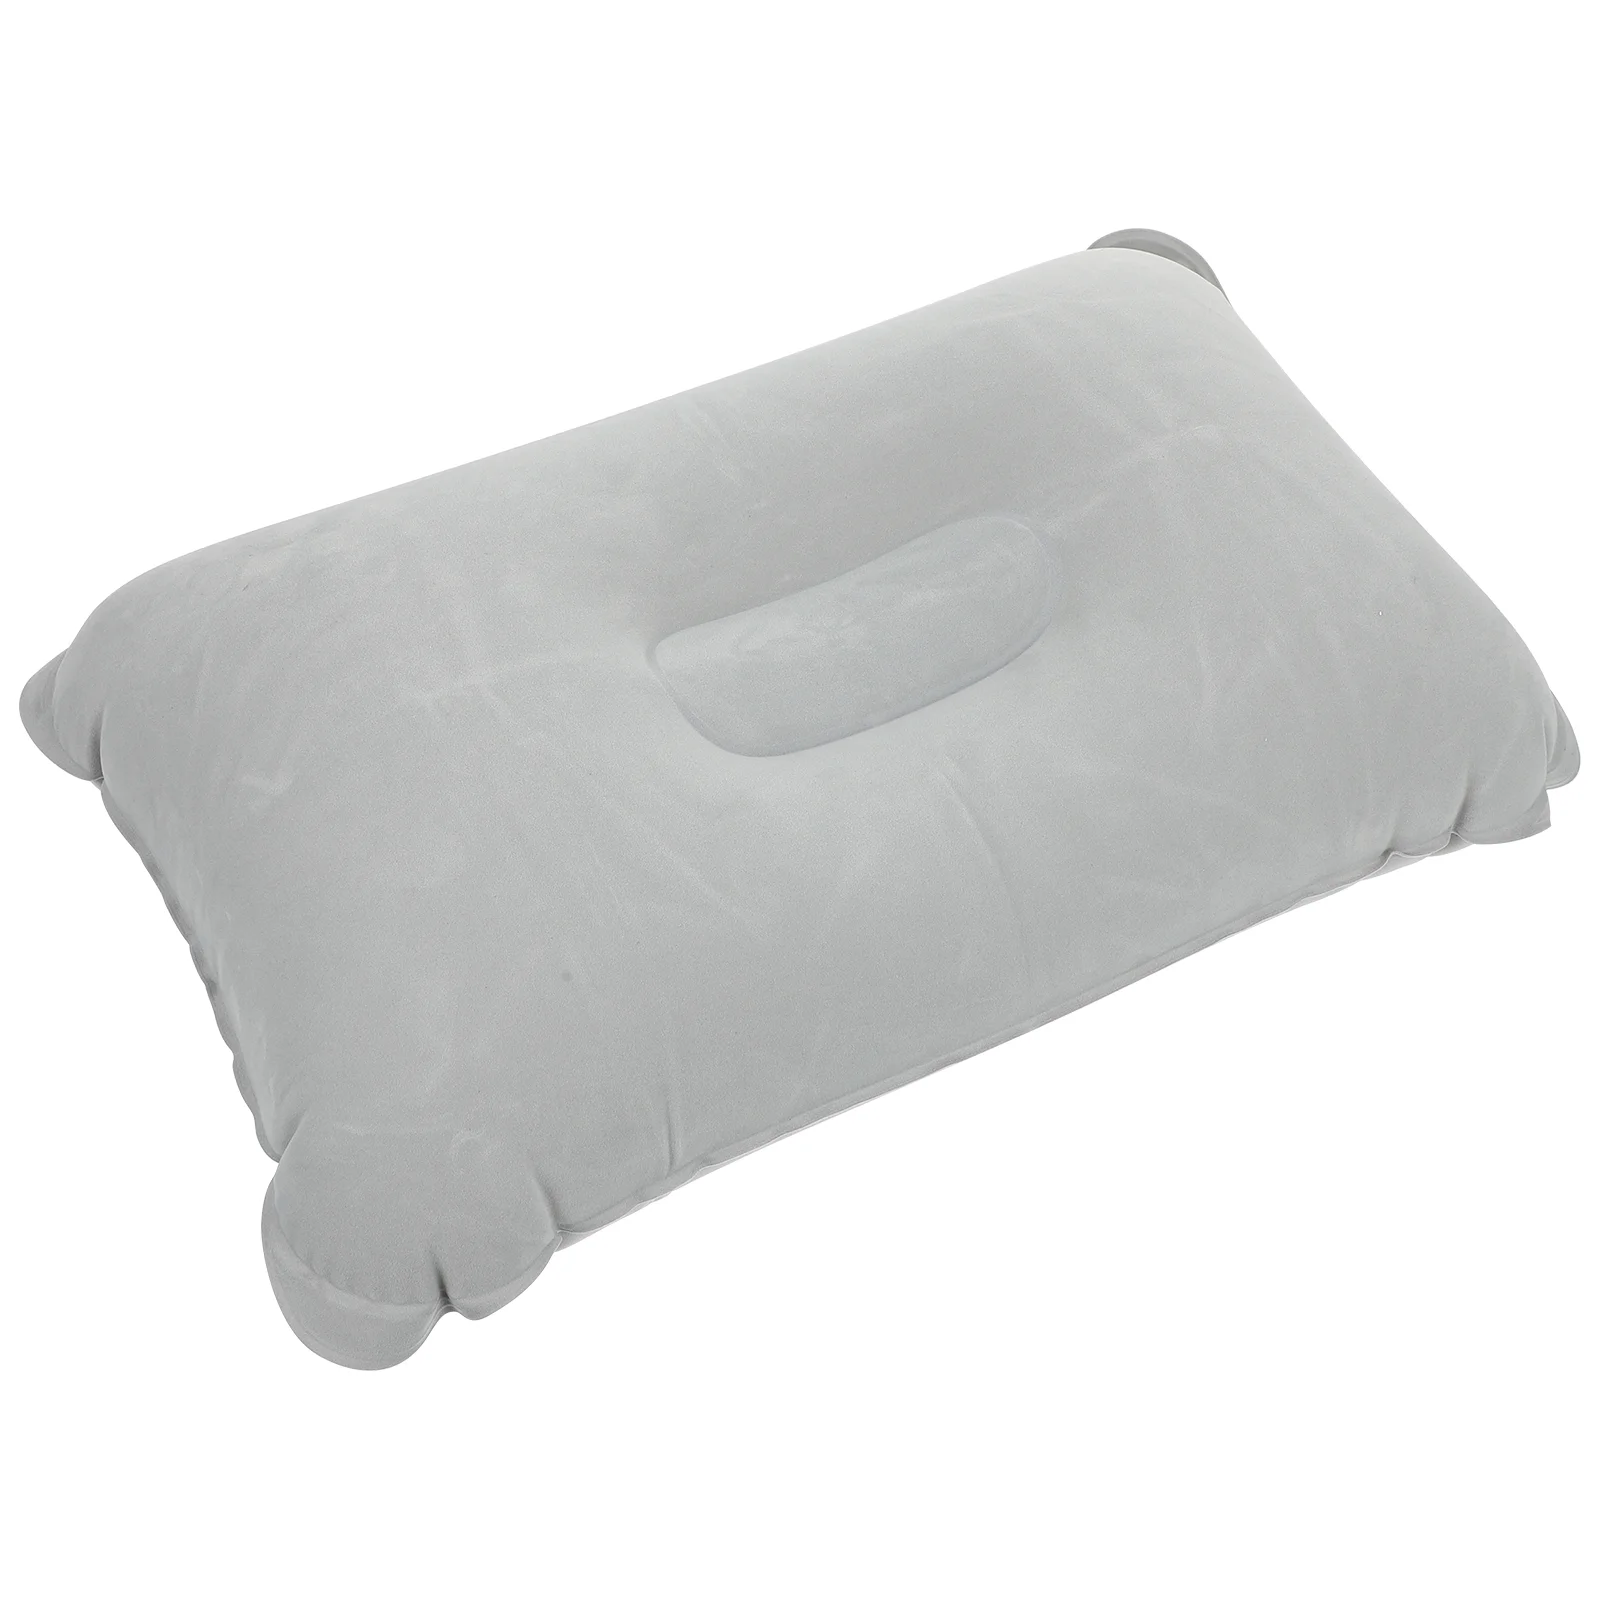 

Flocking Inflatable Pillow Camping Convenient Rest Office Napping Resting Pvc Portable Mattress